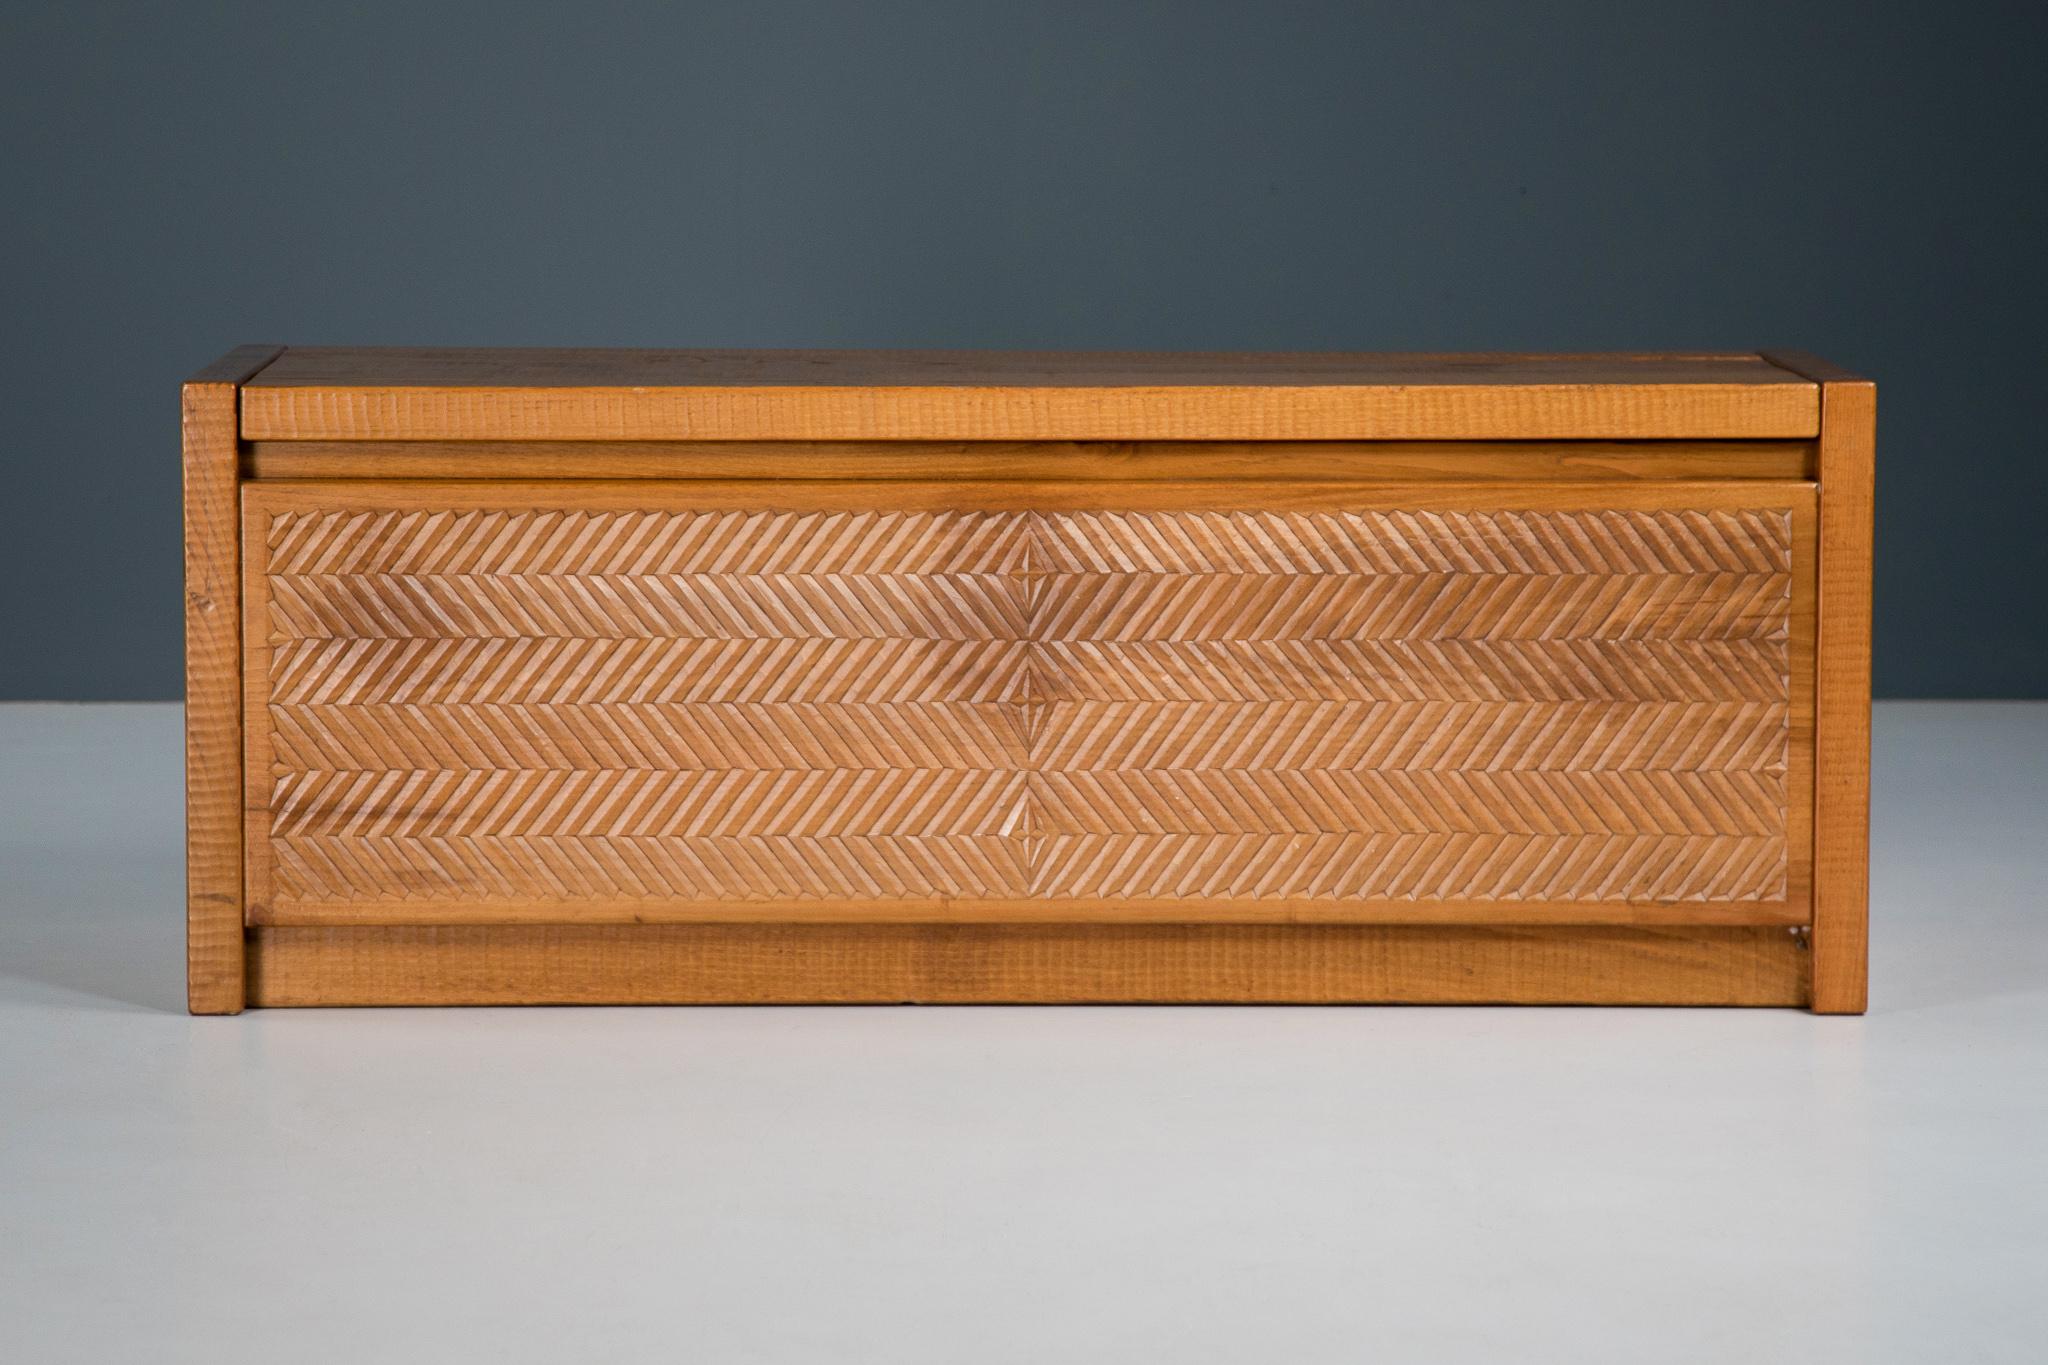 A very elegant blanket chests hand carved out of Italian walnut wood and hand-finished in full relief with a gouge designed by Giuseppe Rivadossi in the late 1970s. The architonic style creates emphasis on the apparent structure. Rivadossi furniture